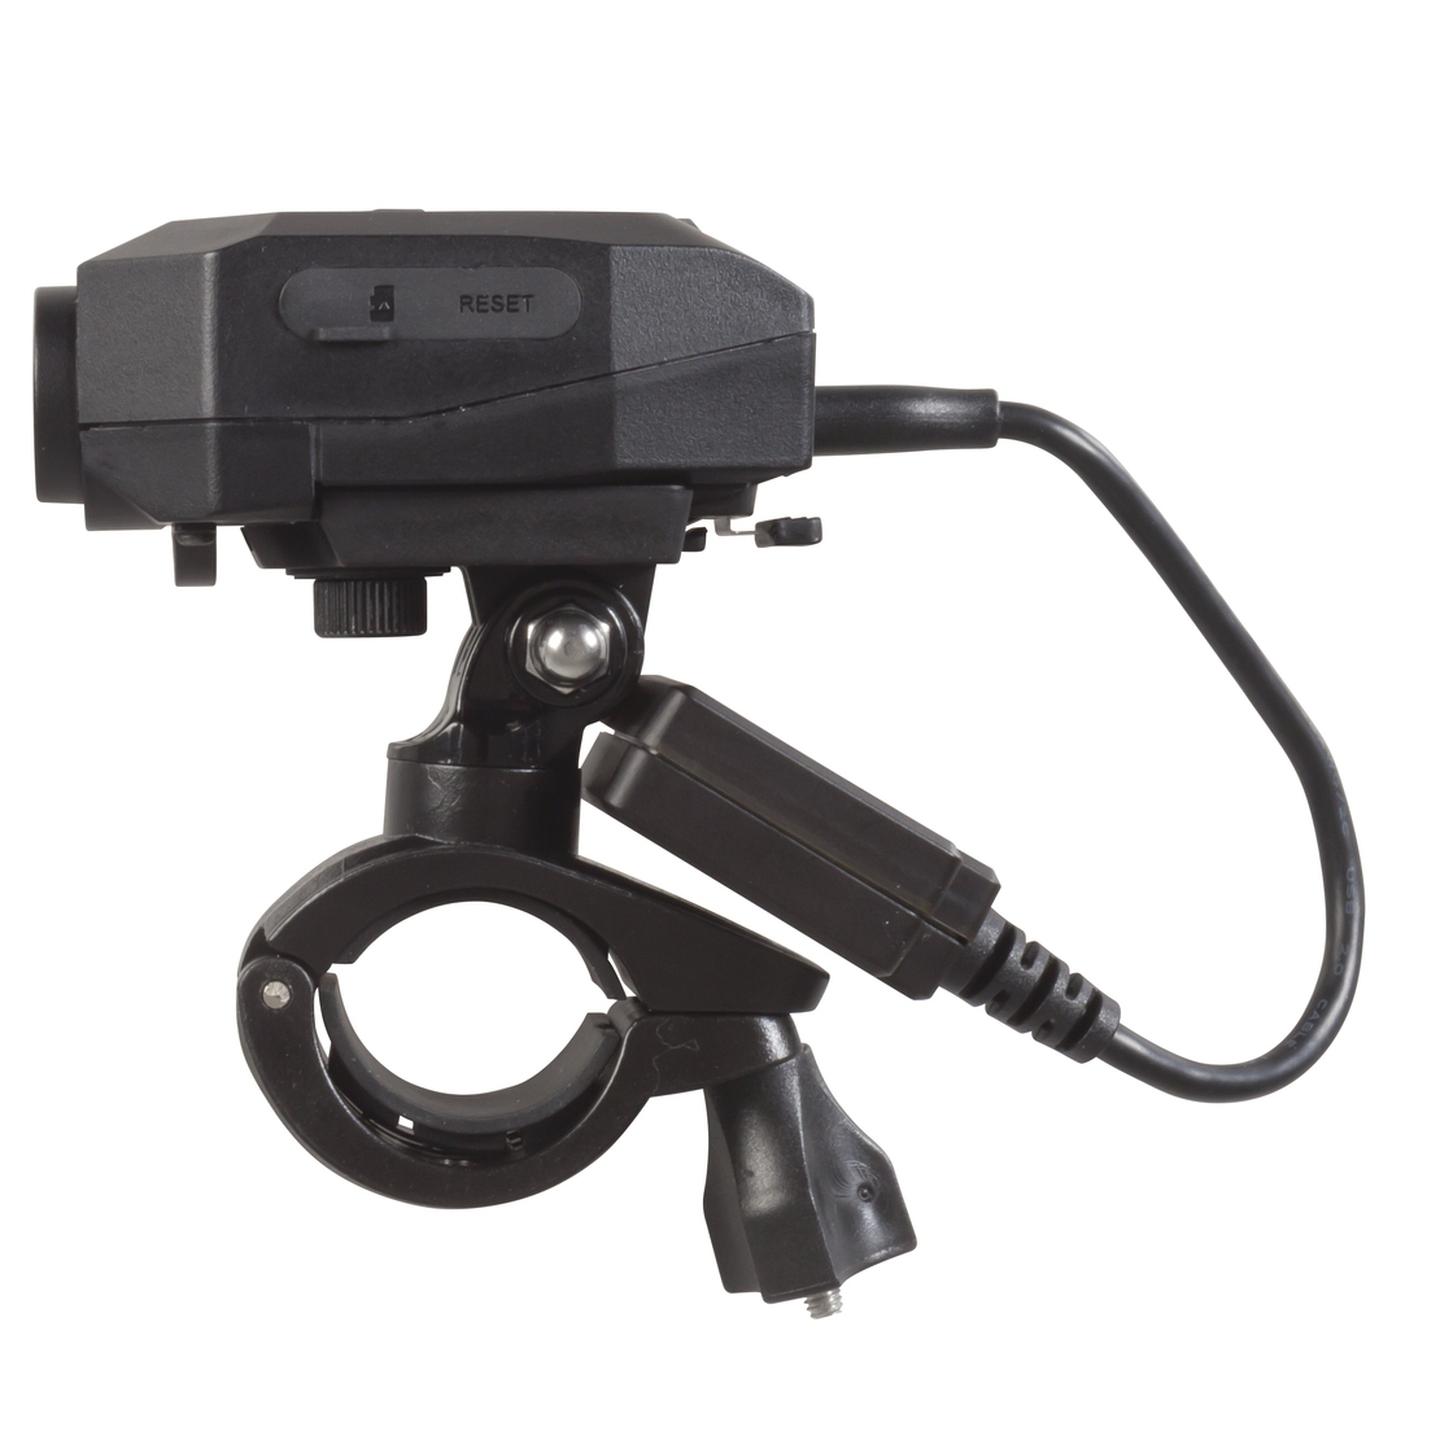 1296p Event Camera with GPS for Bikes